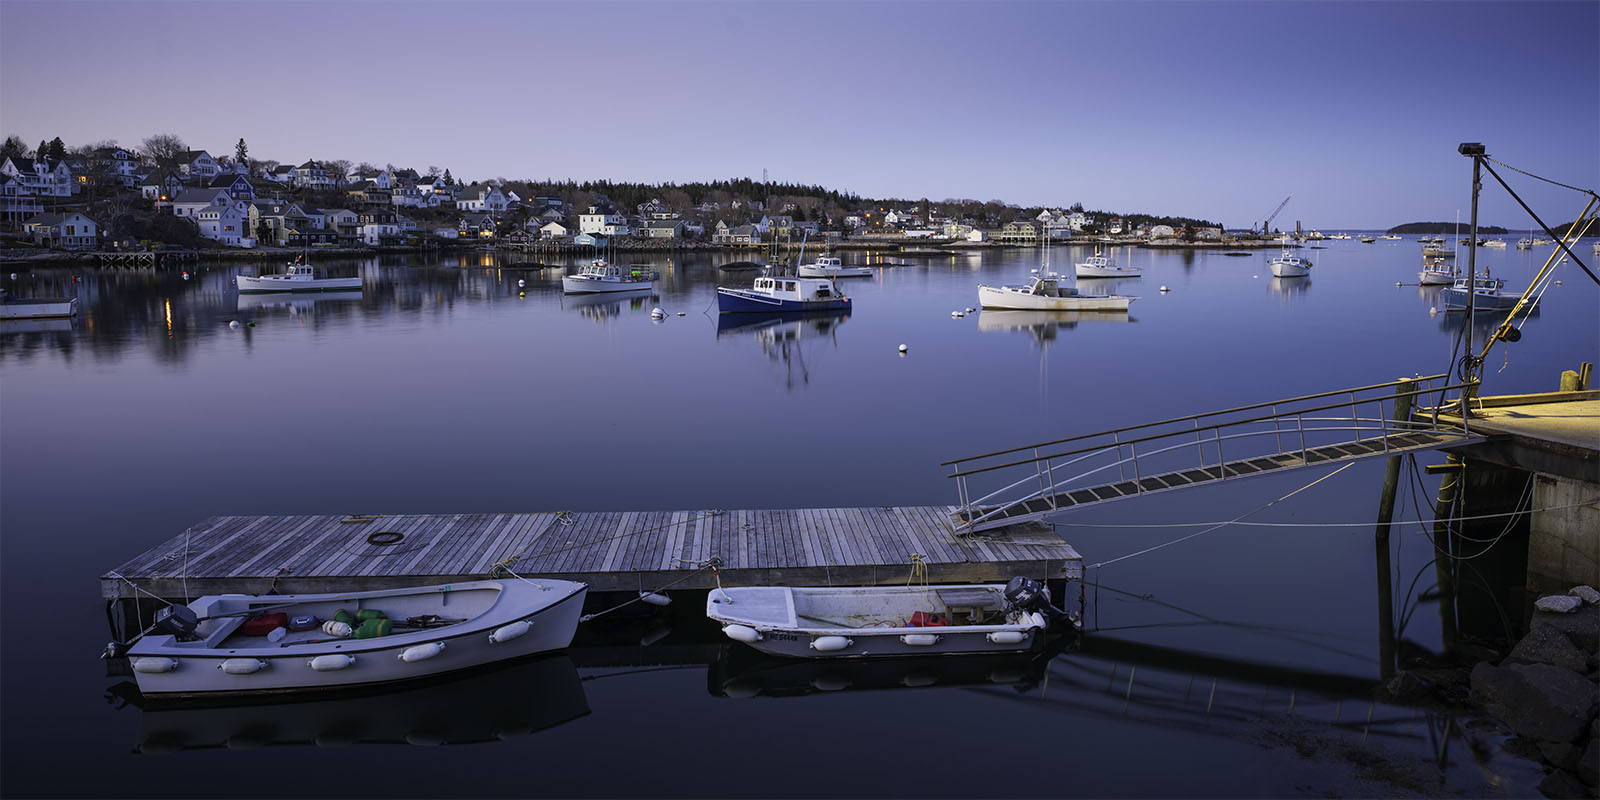 Twilight settles over a serene harbor with boats moored peacefully on calm waters. a small floating dock in the foreground holds two boats, against a backdrop of a quaint hillside town.